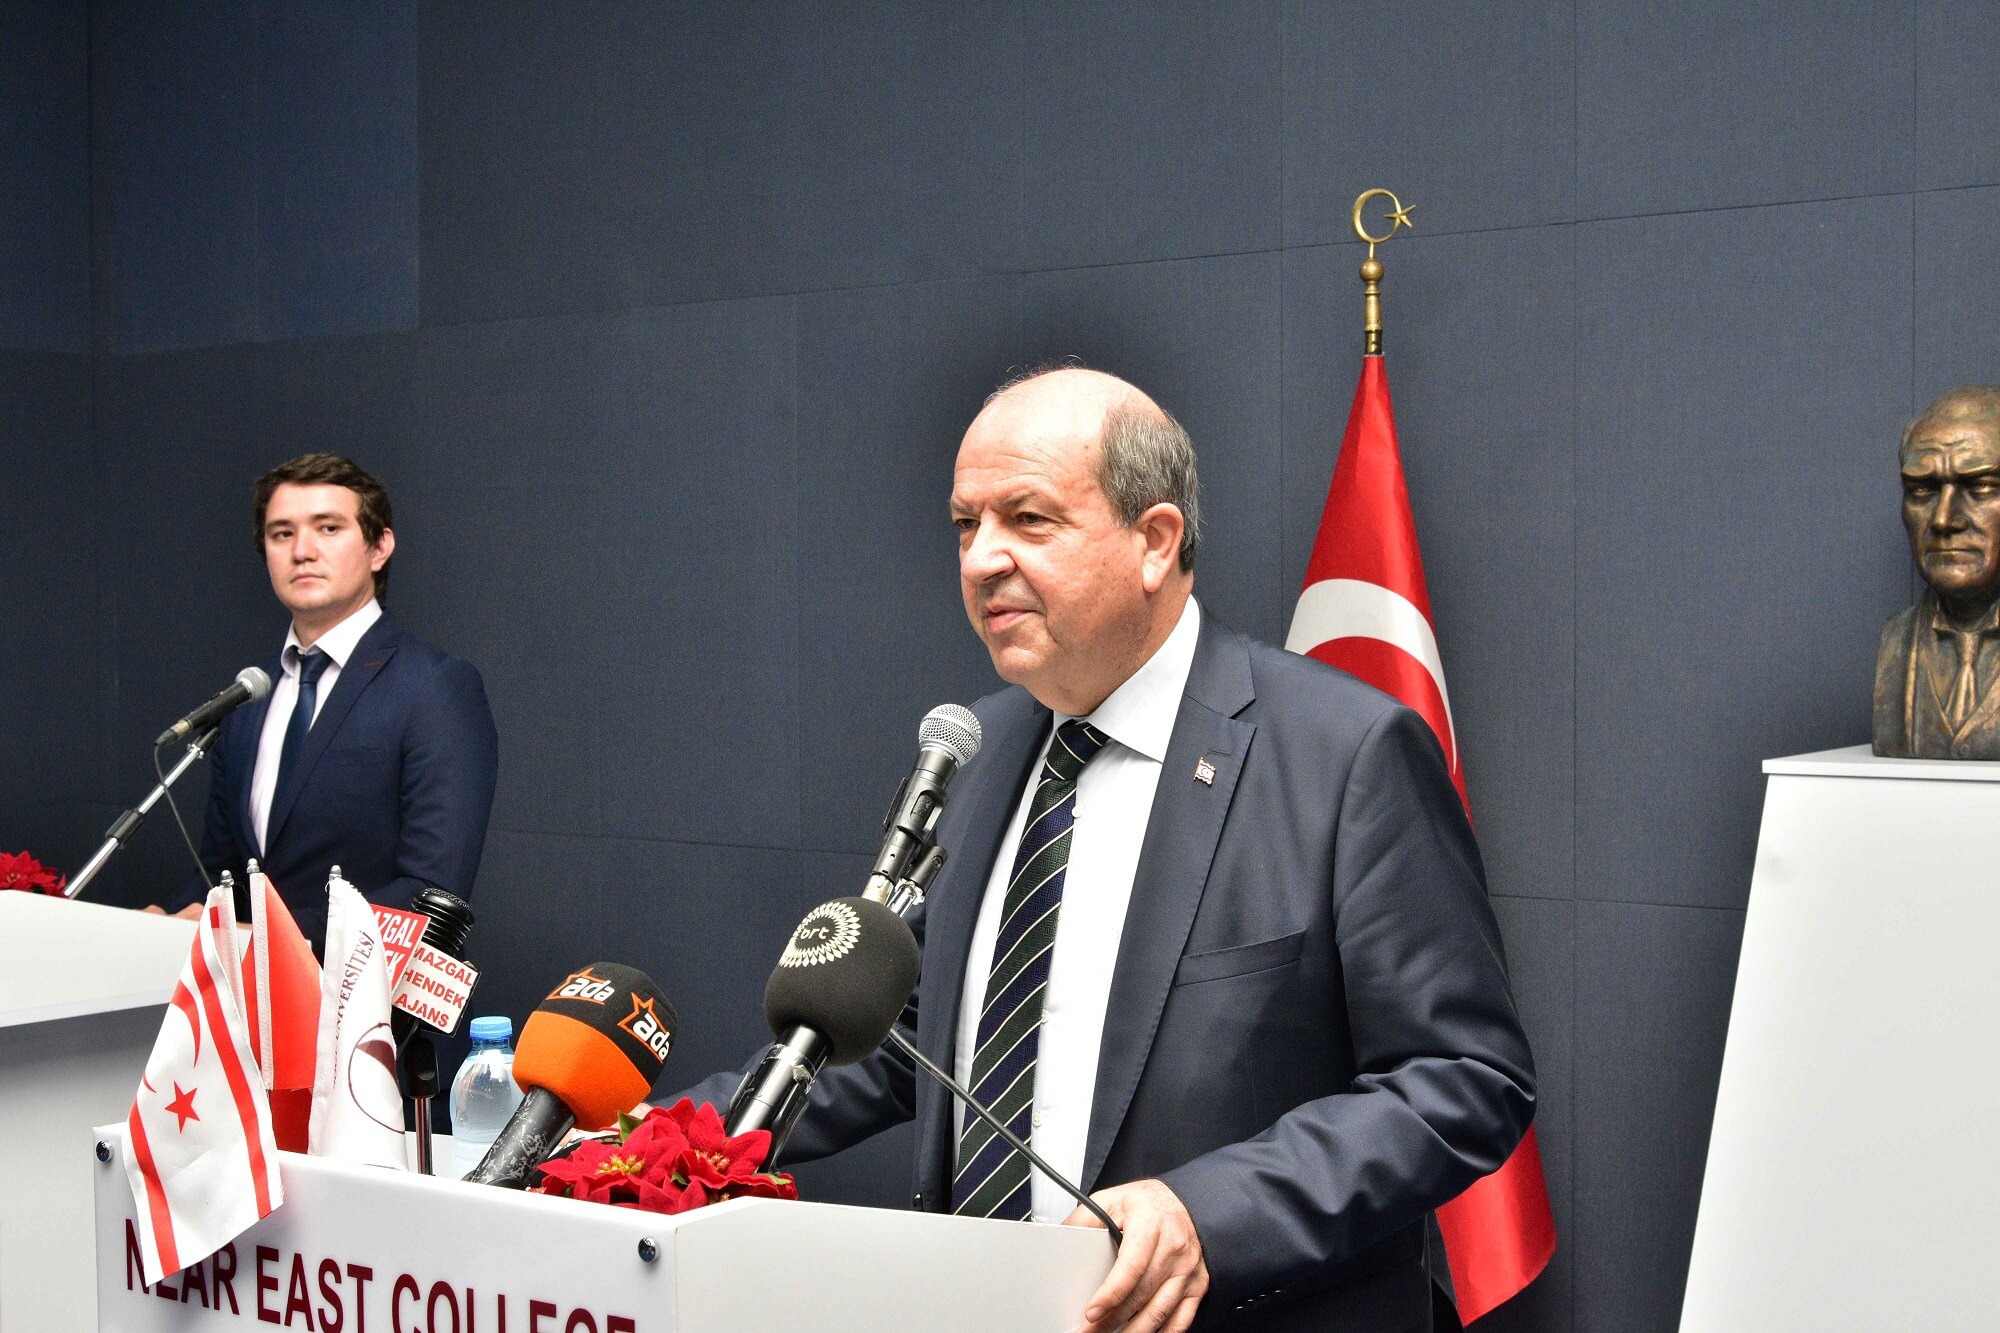 Official Opening of the Near East College Yeniboğaziçi Campus was held with the participation of President Ersin Tatar